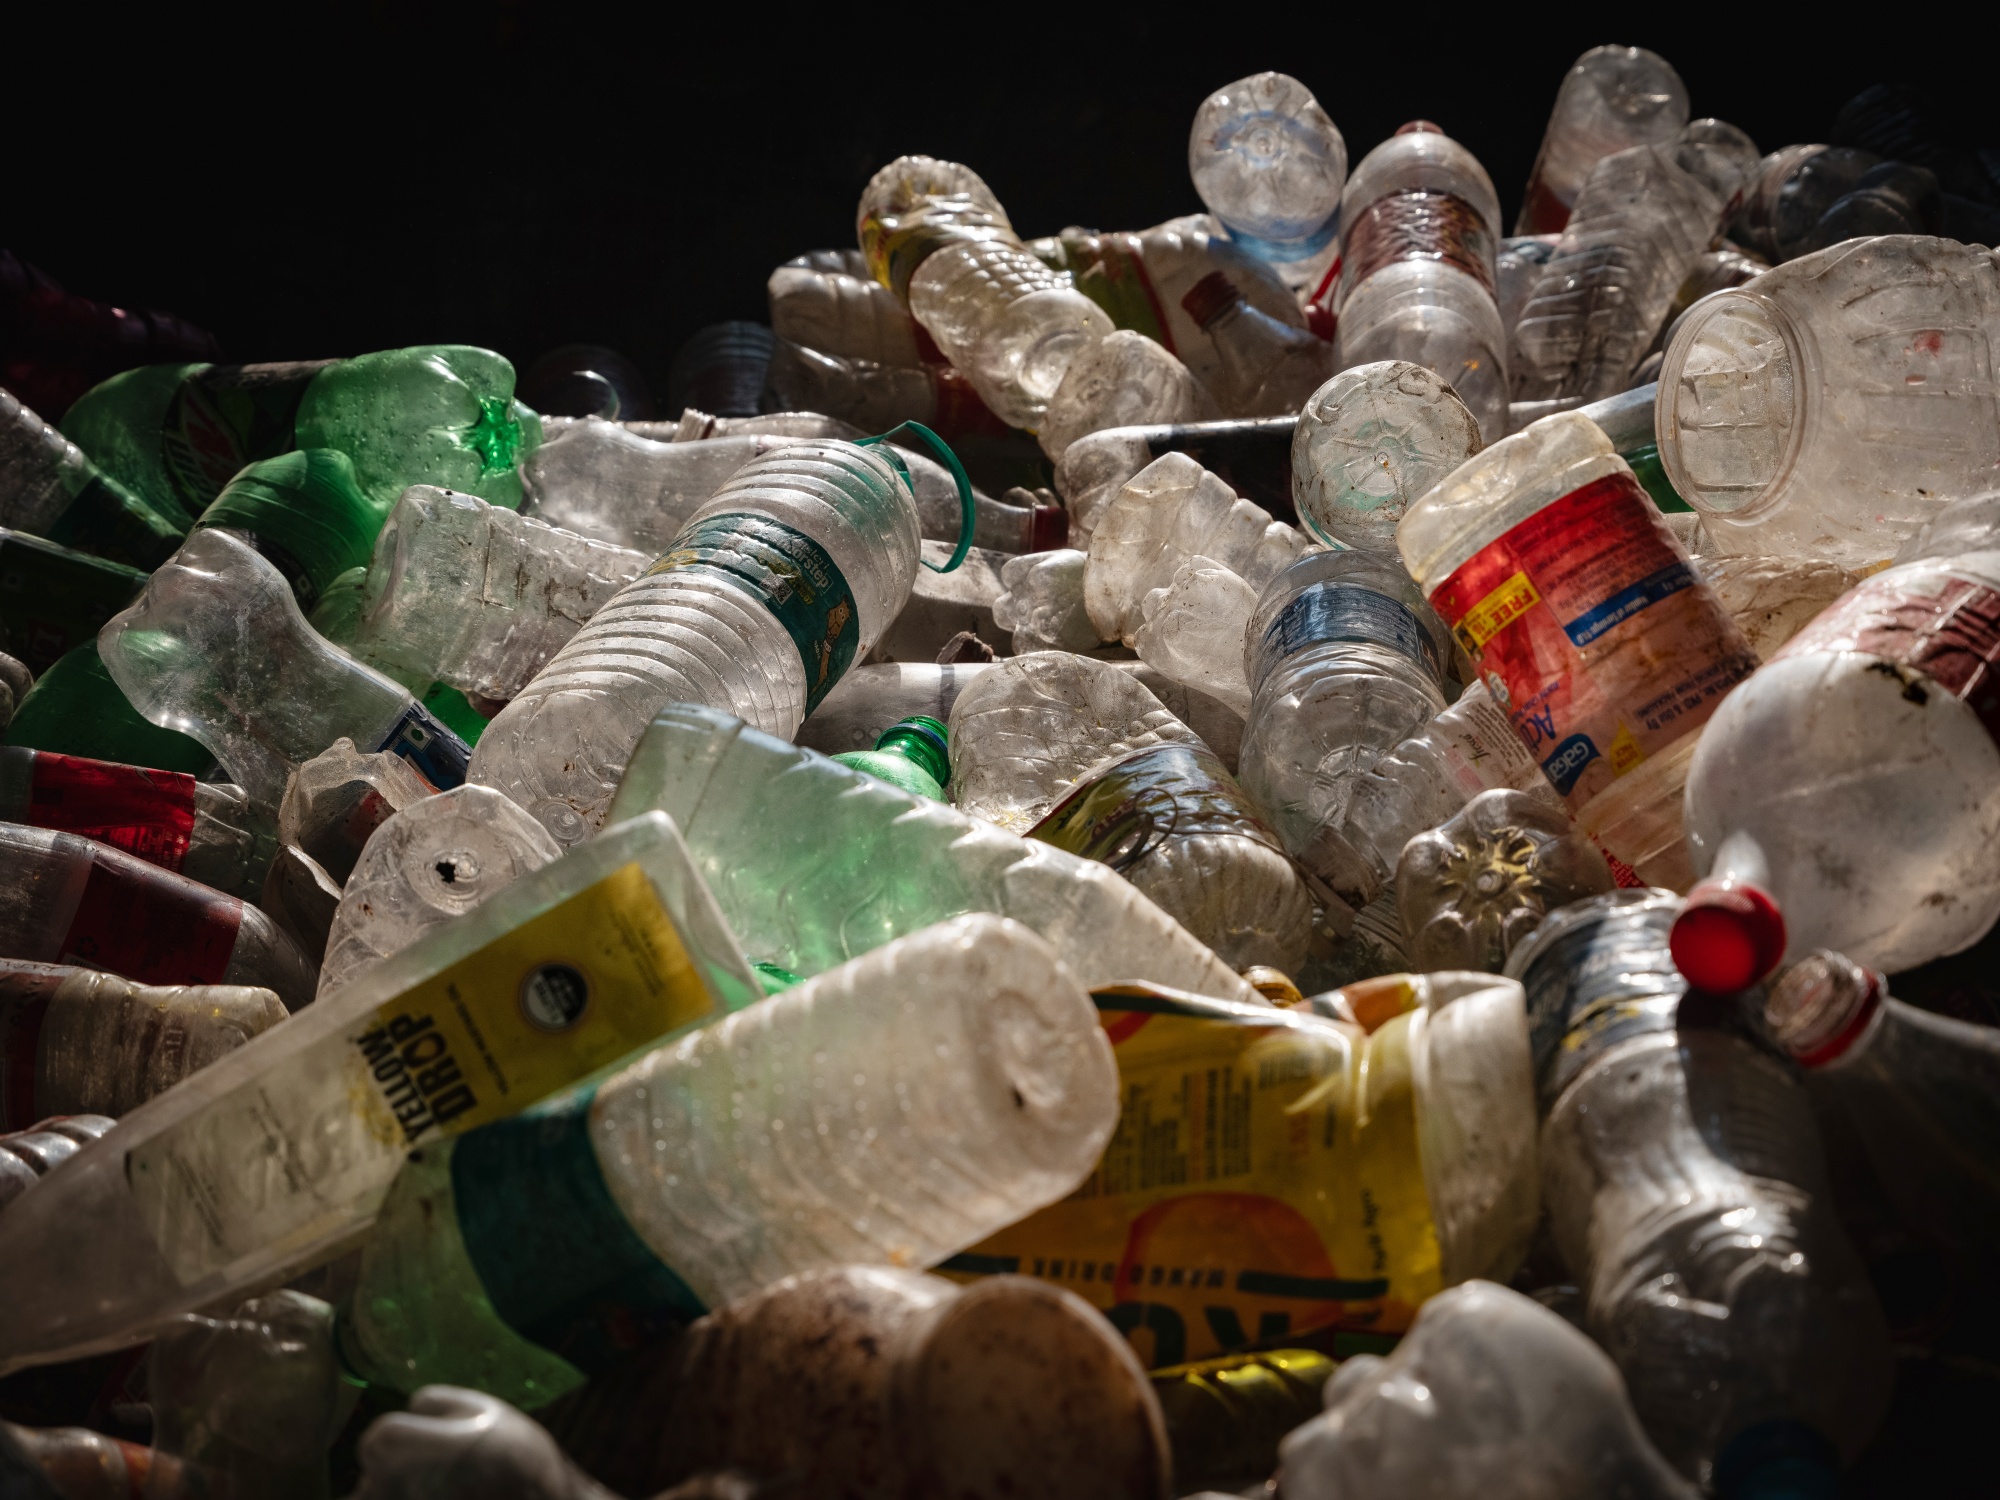 Bloomberg Opinion on X: The main culprit of plastic pollution